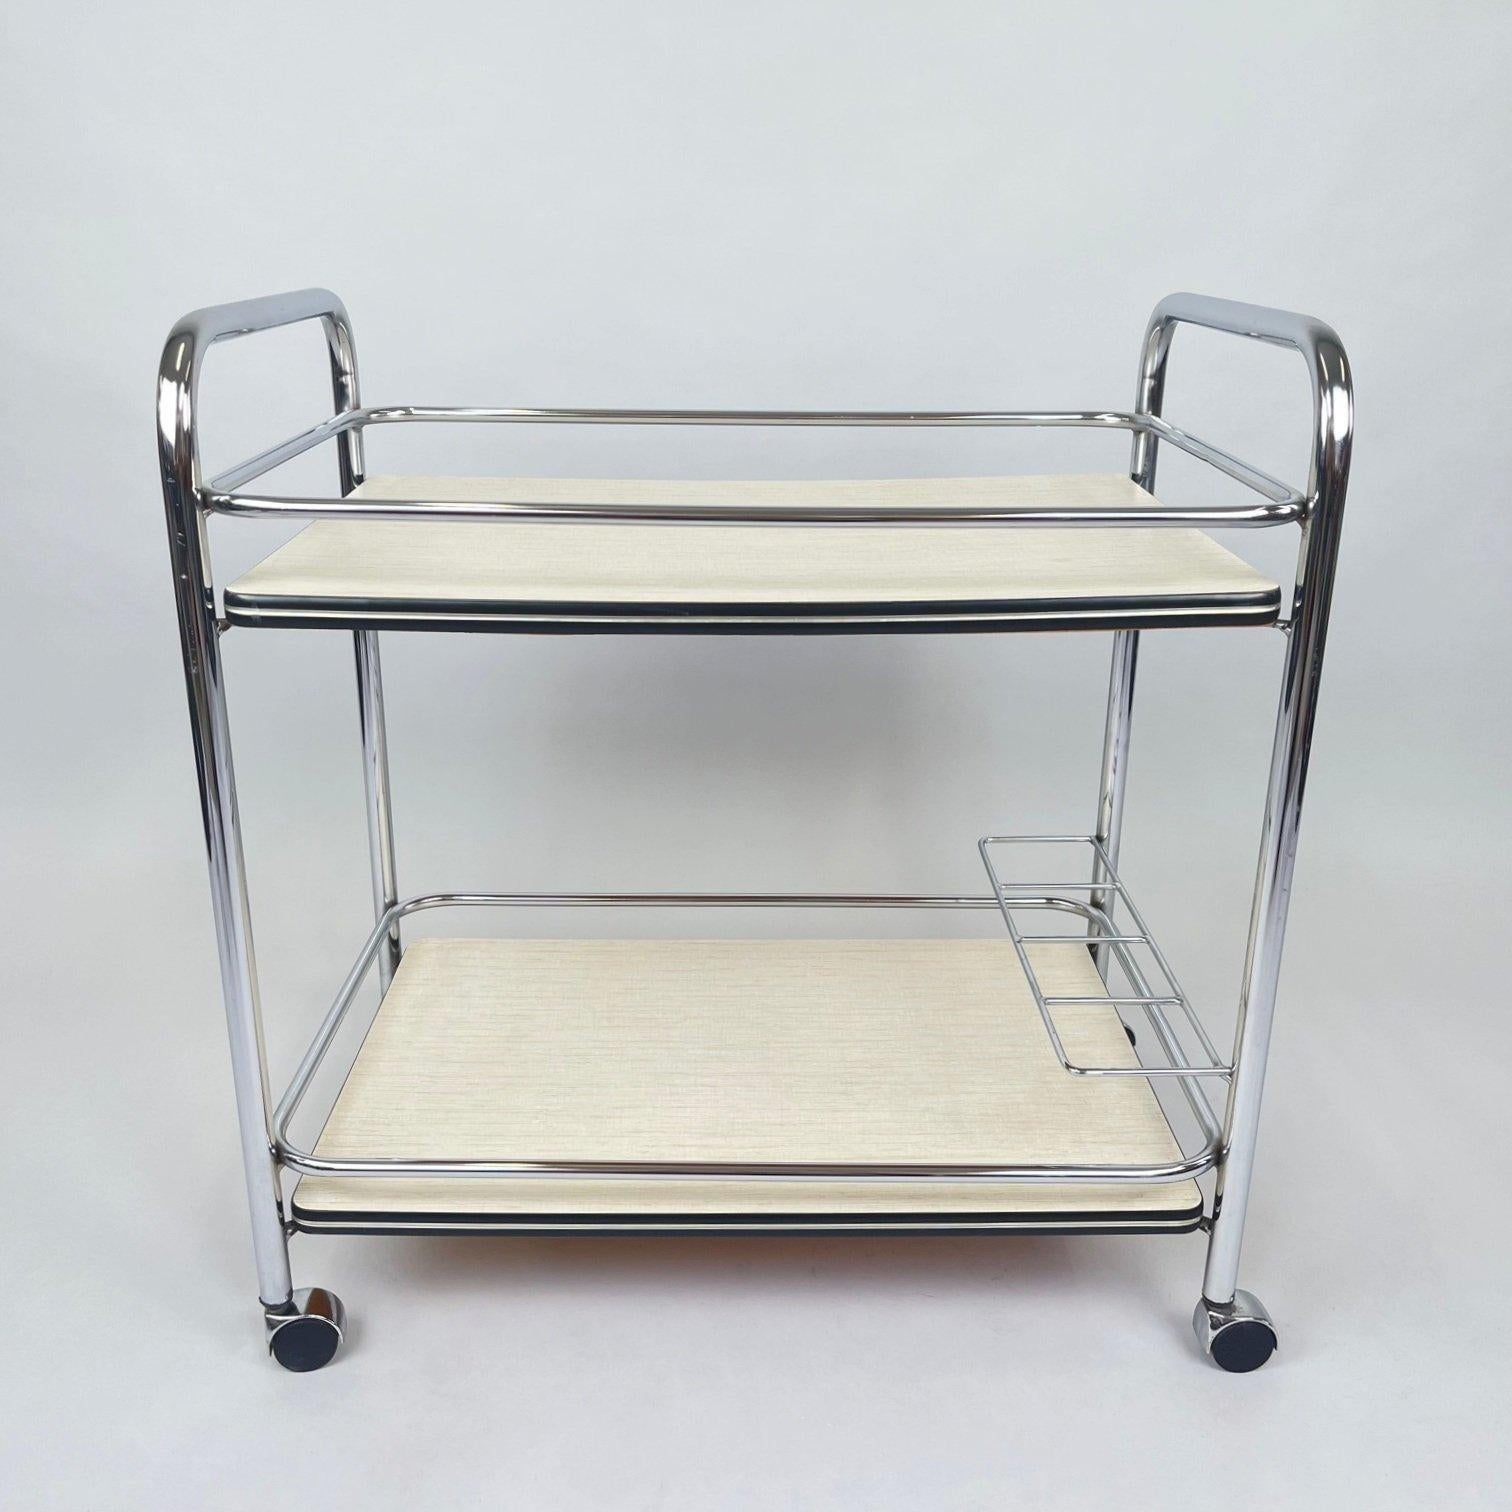 Vintage serving trolley made of chrome and plywood. 
Very good vintage condition with some signs of use (see photo).